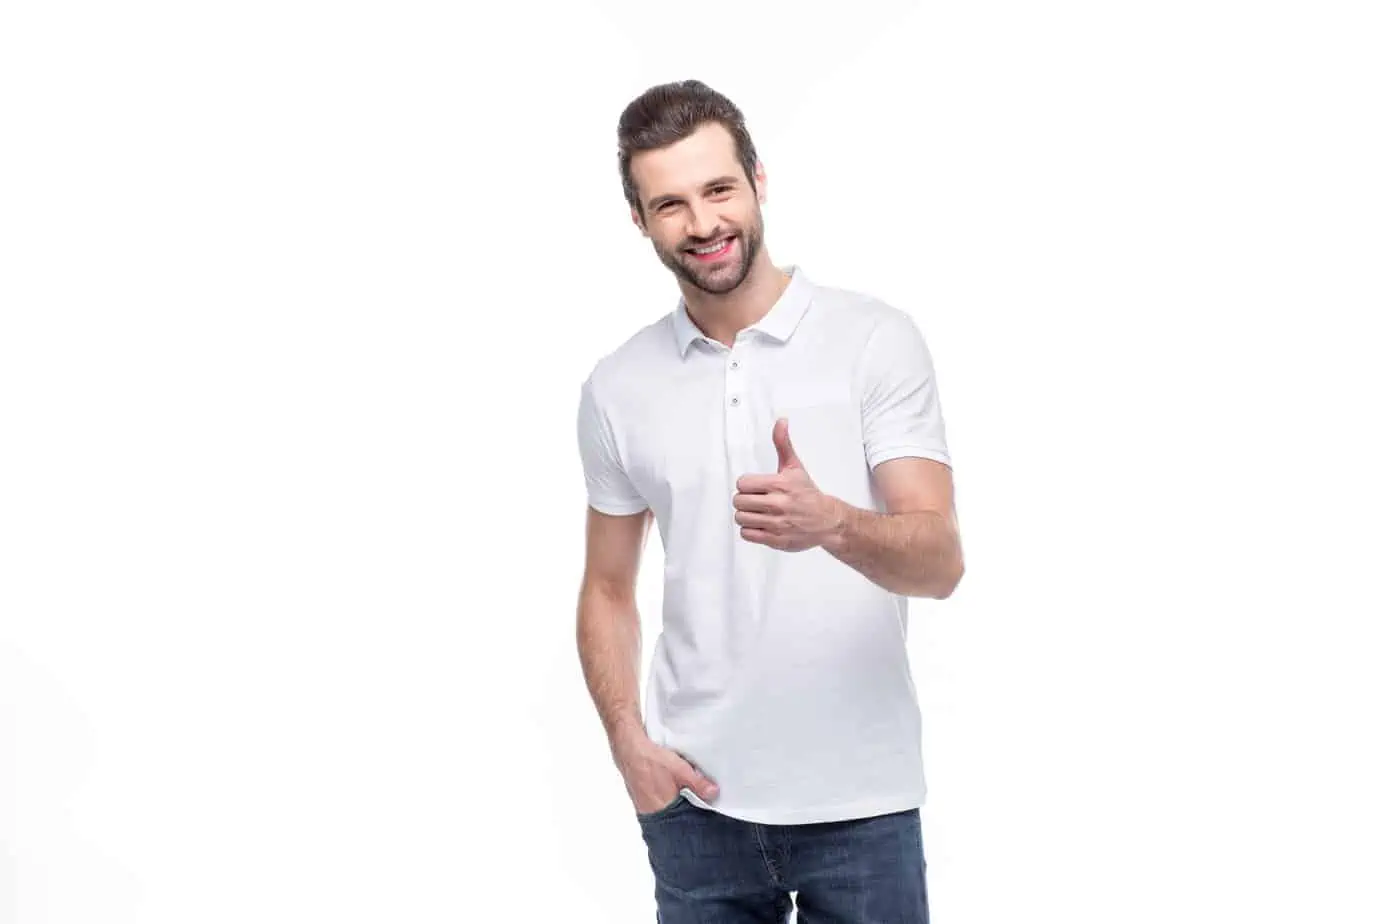 A man in a white shirt giving a thumbs up